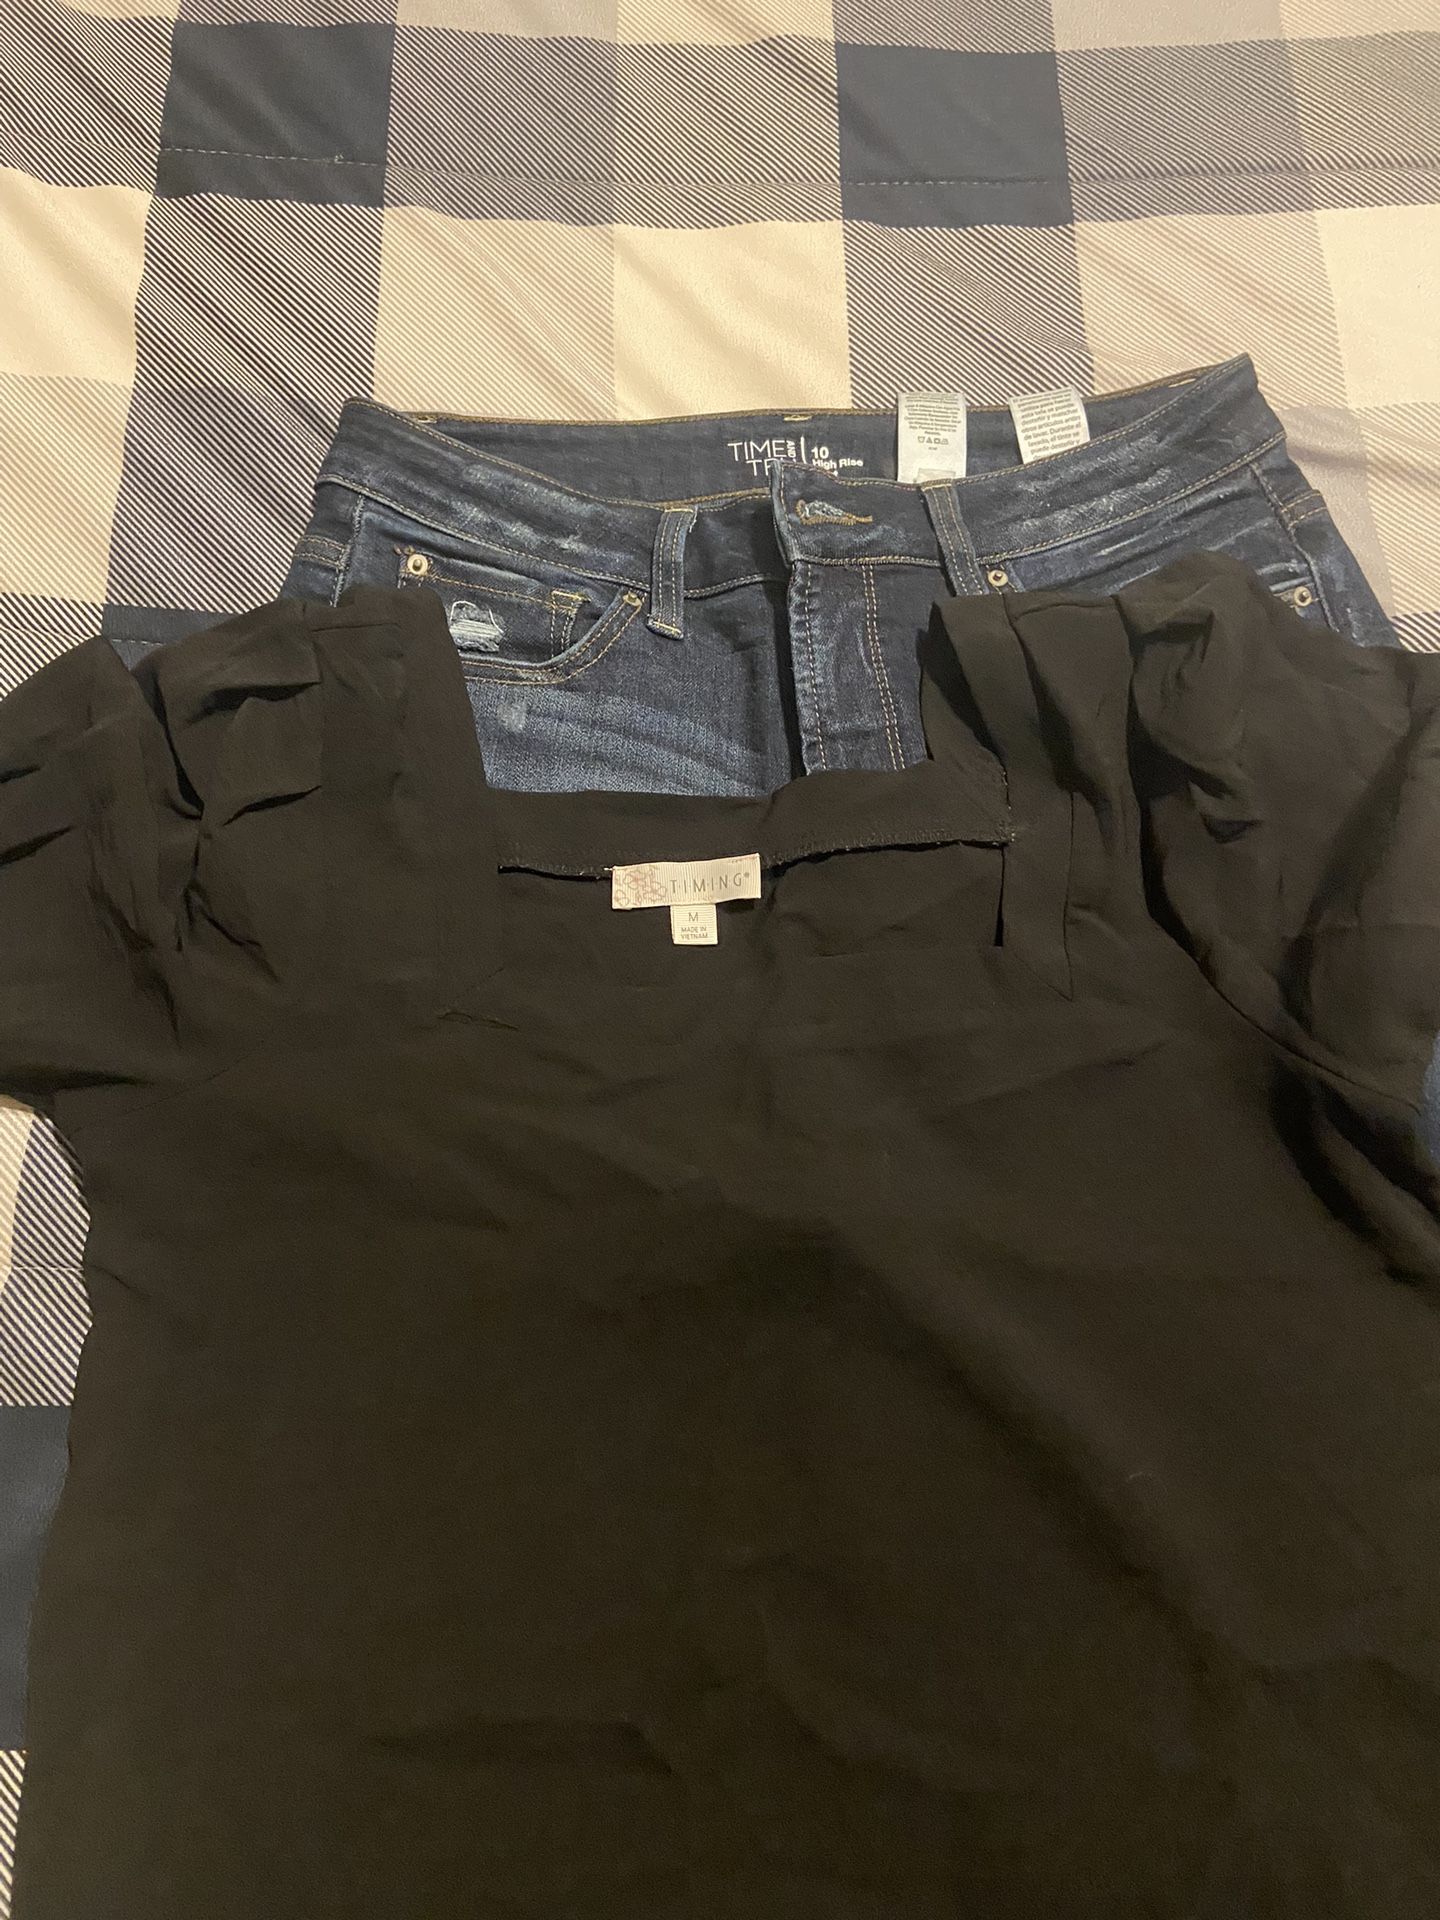 Jeans Size 10 Y Camisa Size M